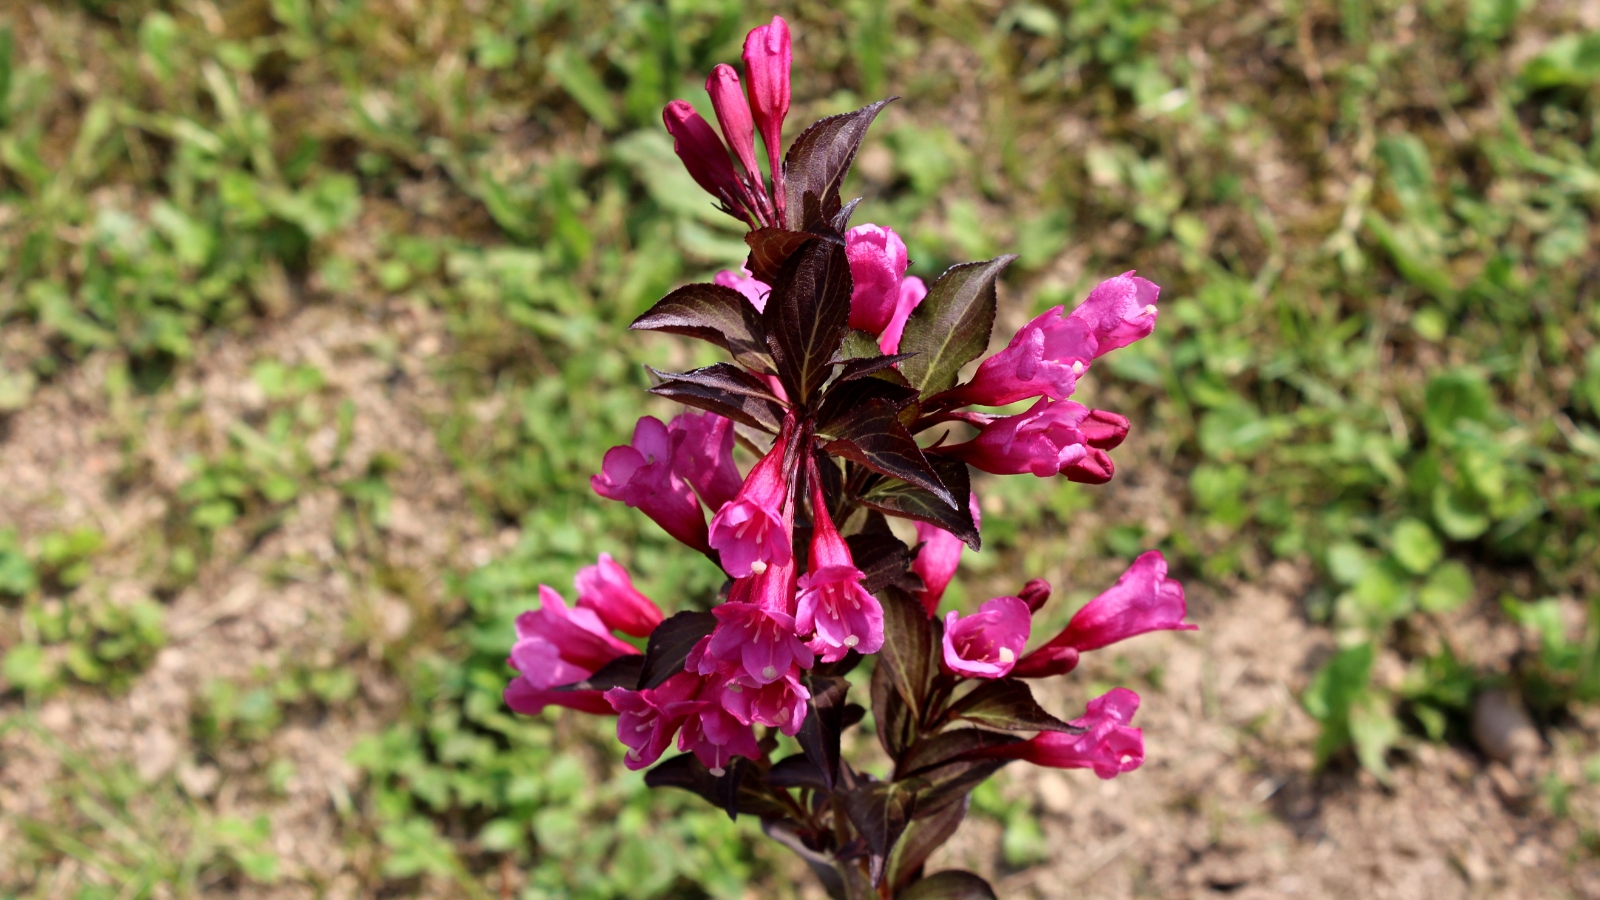 A 'Spilled Wine' weigela shrub with purple blooms and dark brown leaves, soaking in sunlight against a soft backdrop of blurred green grass.